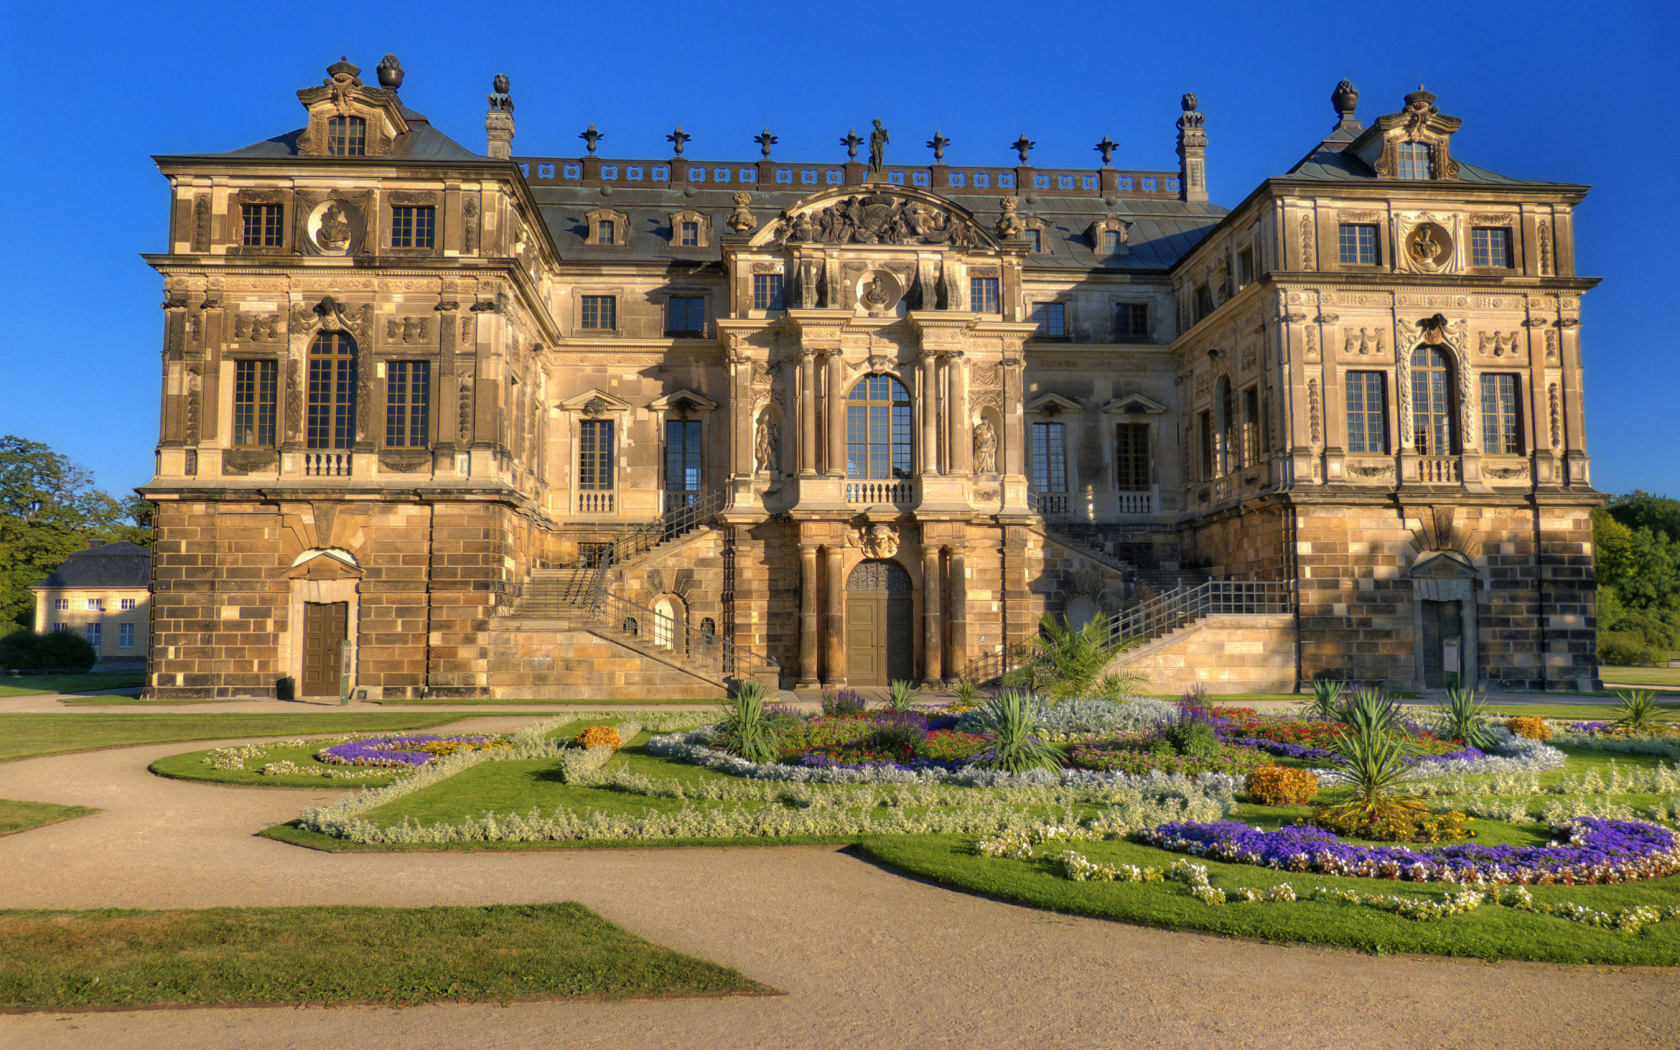 The palace in the Great Garden, Dresden. Germany